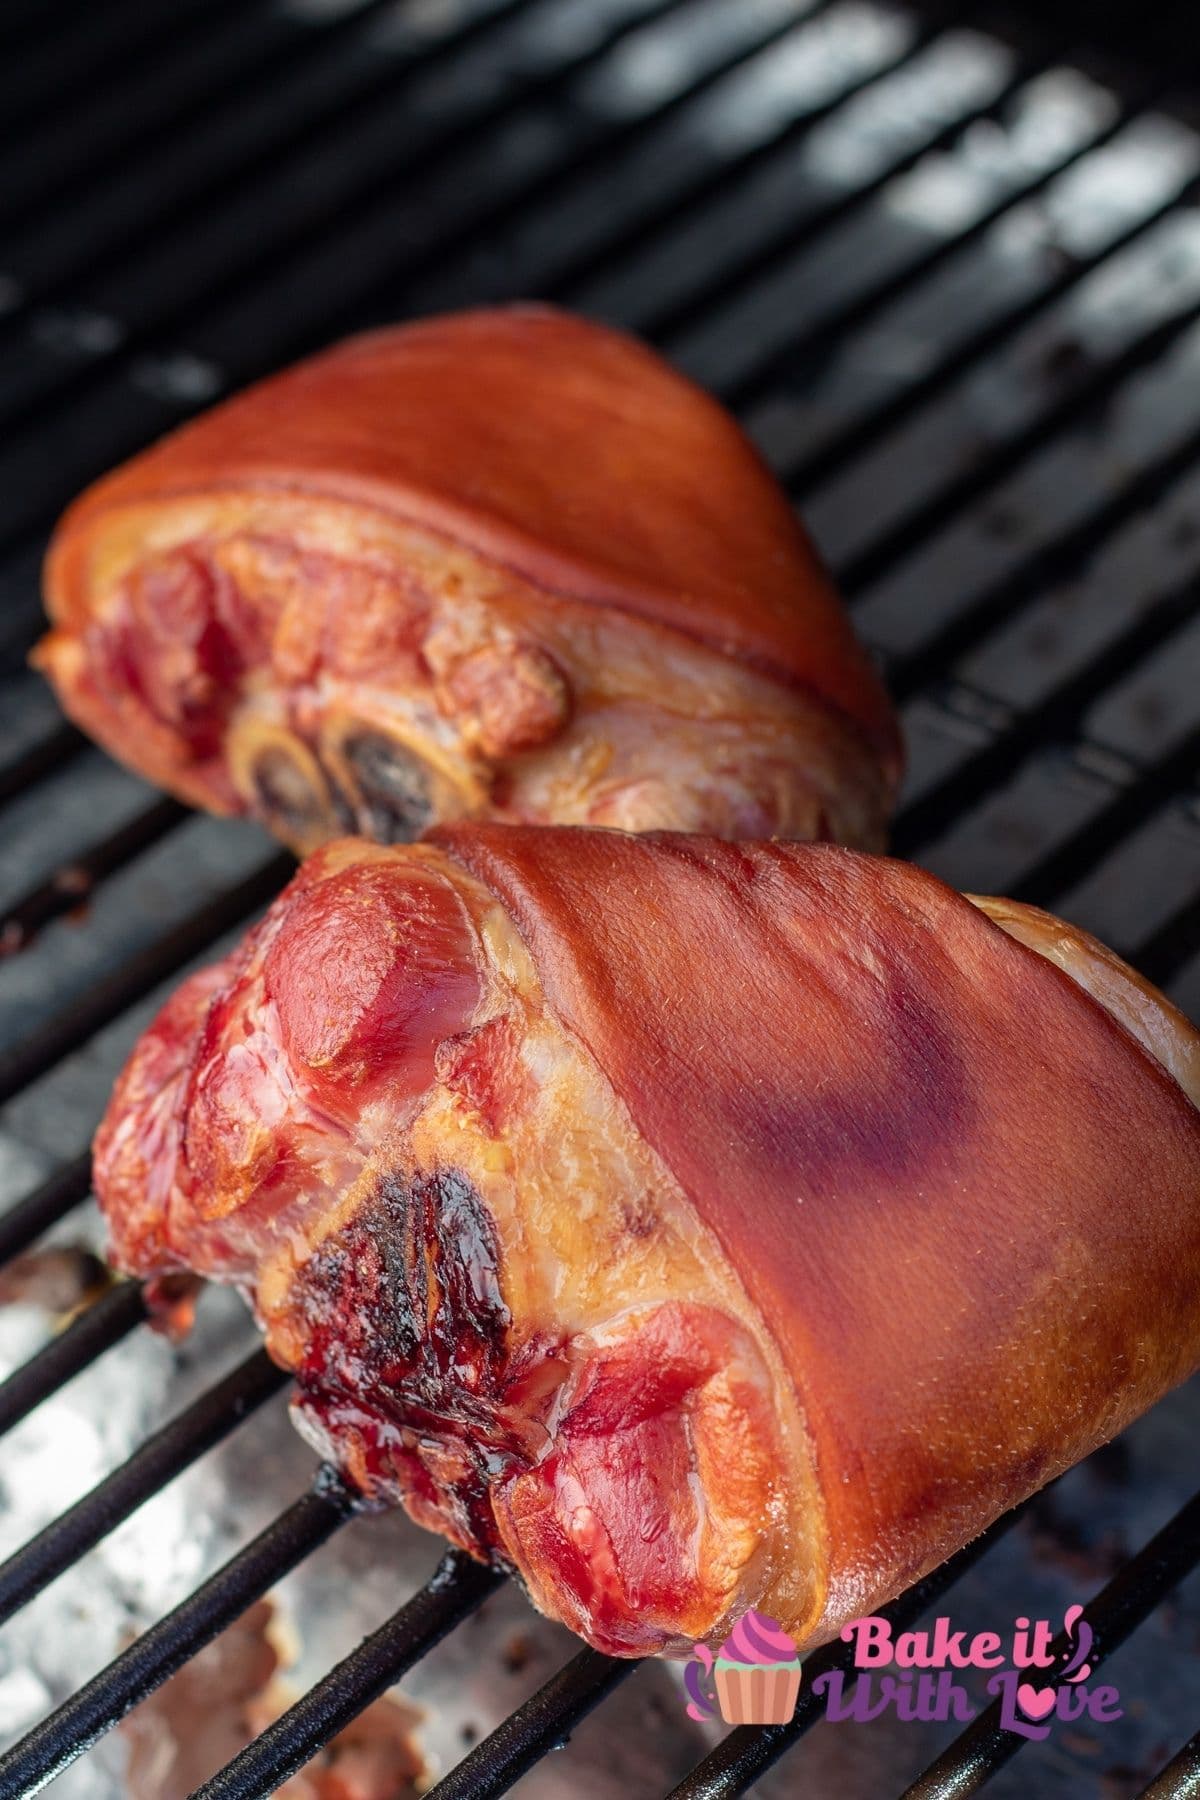 Tall view of the smoked ham hocks on the Traeger grill during smoking.